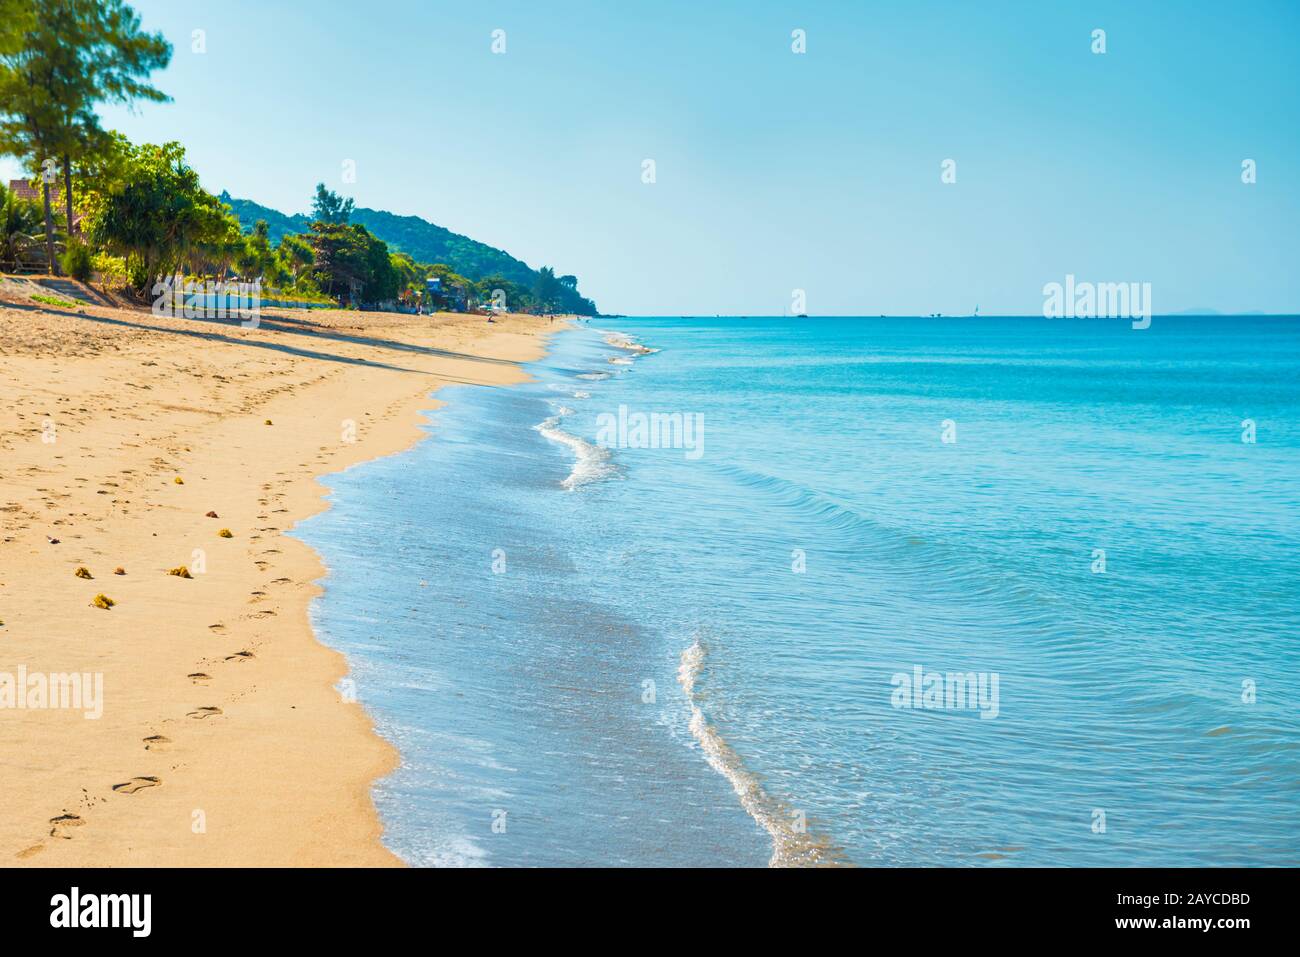 Landscape of tropical island with sand beach and blue sea Stock Photo